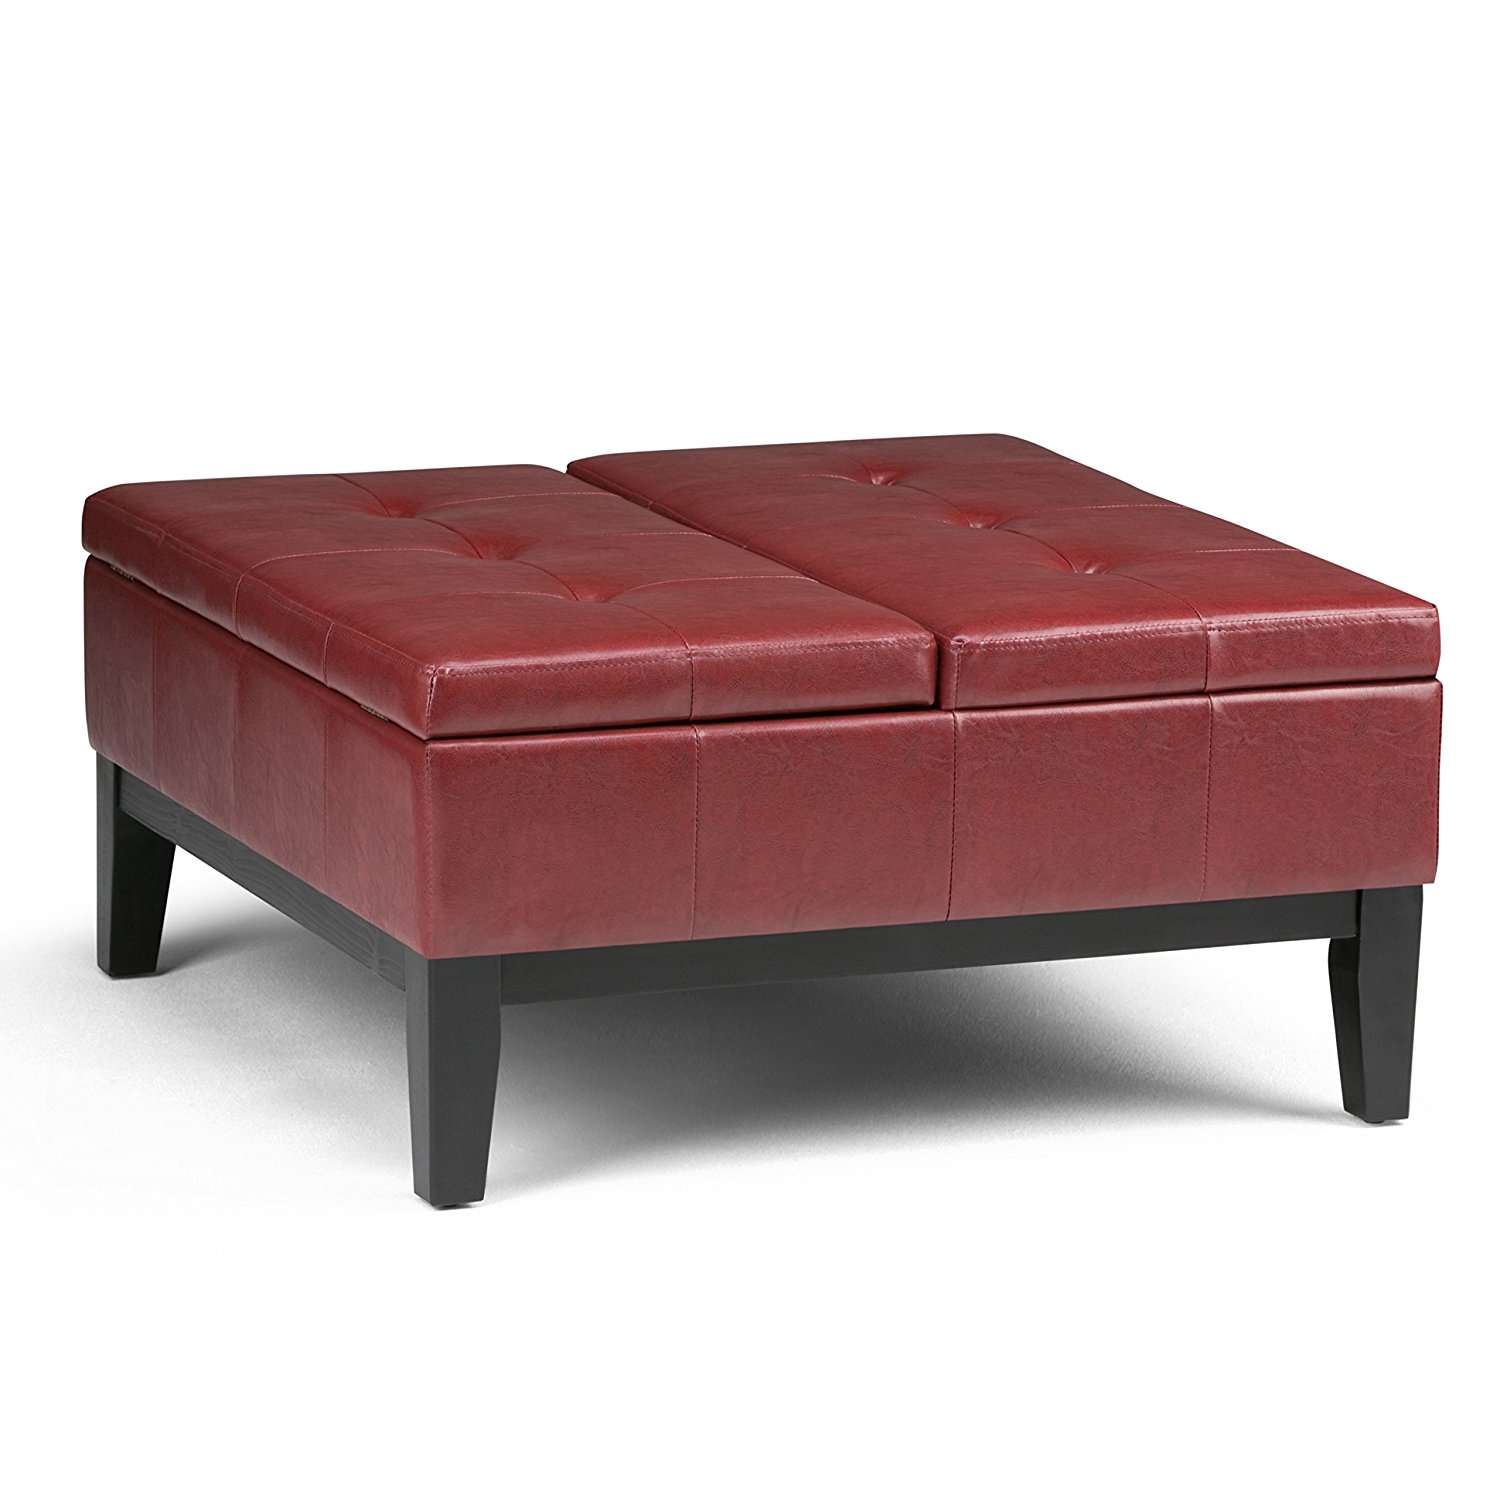 Tufted Coffee Table Ottoman 30, 30 Inch Distressed Vegan Leather Tufted Coffee Table Ottoman